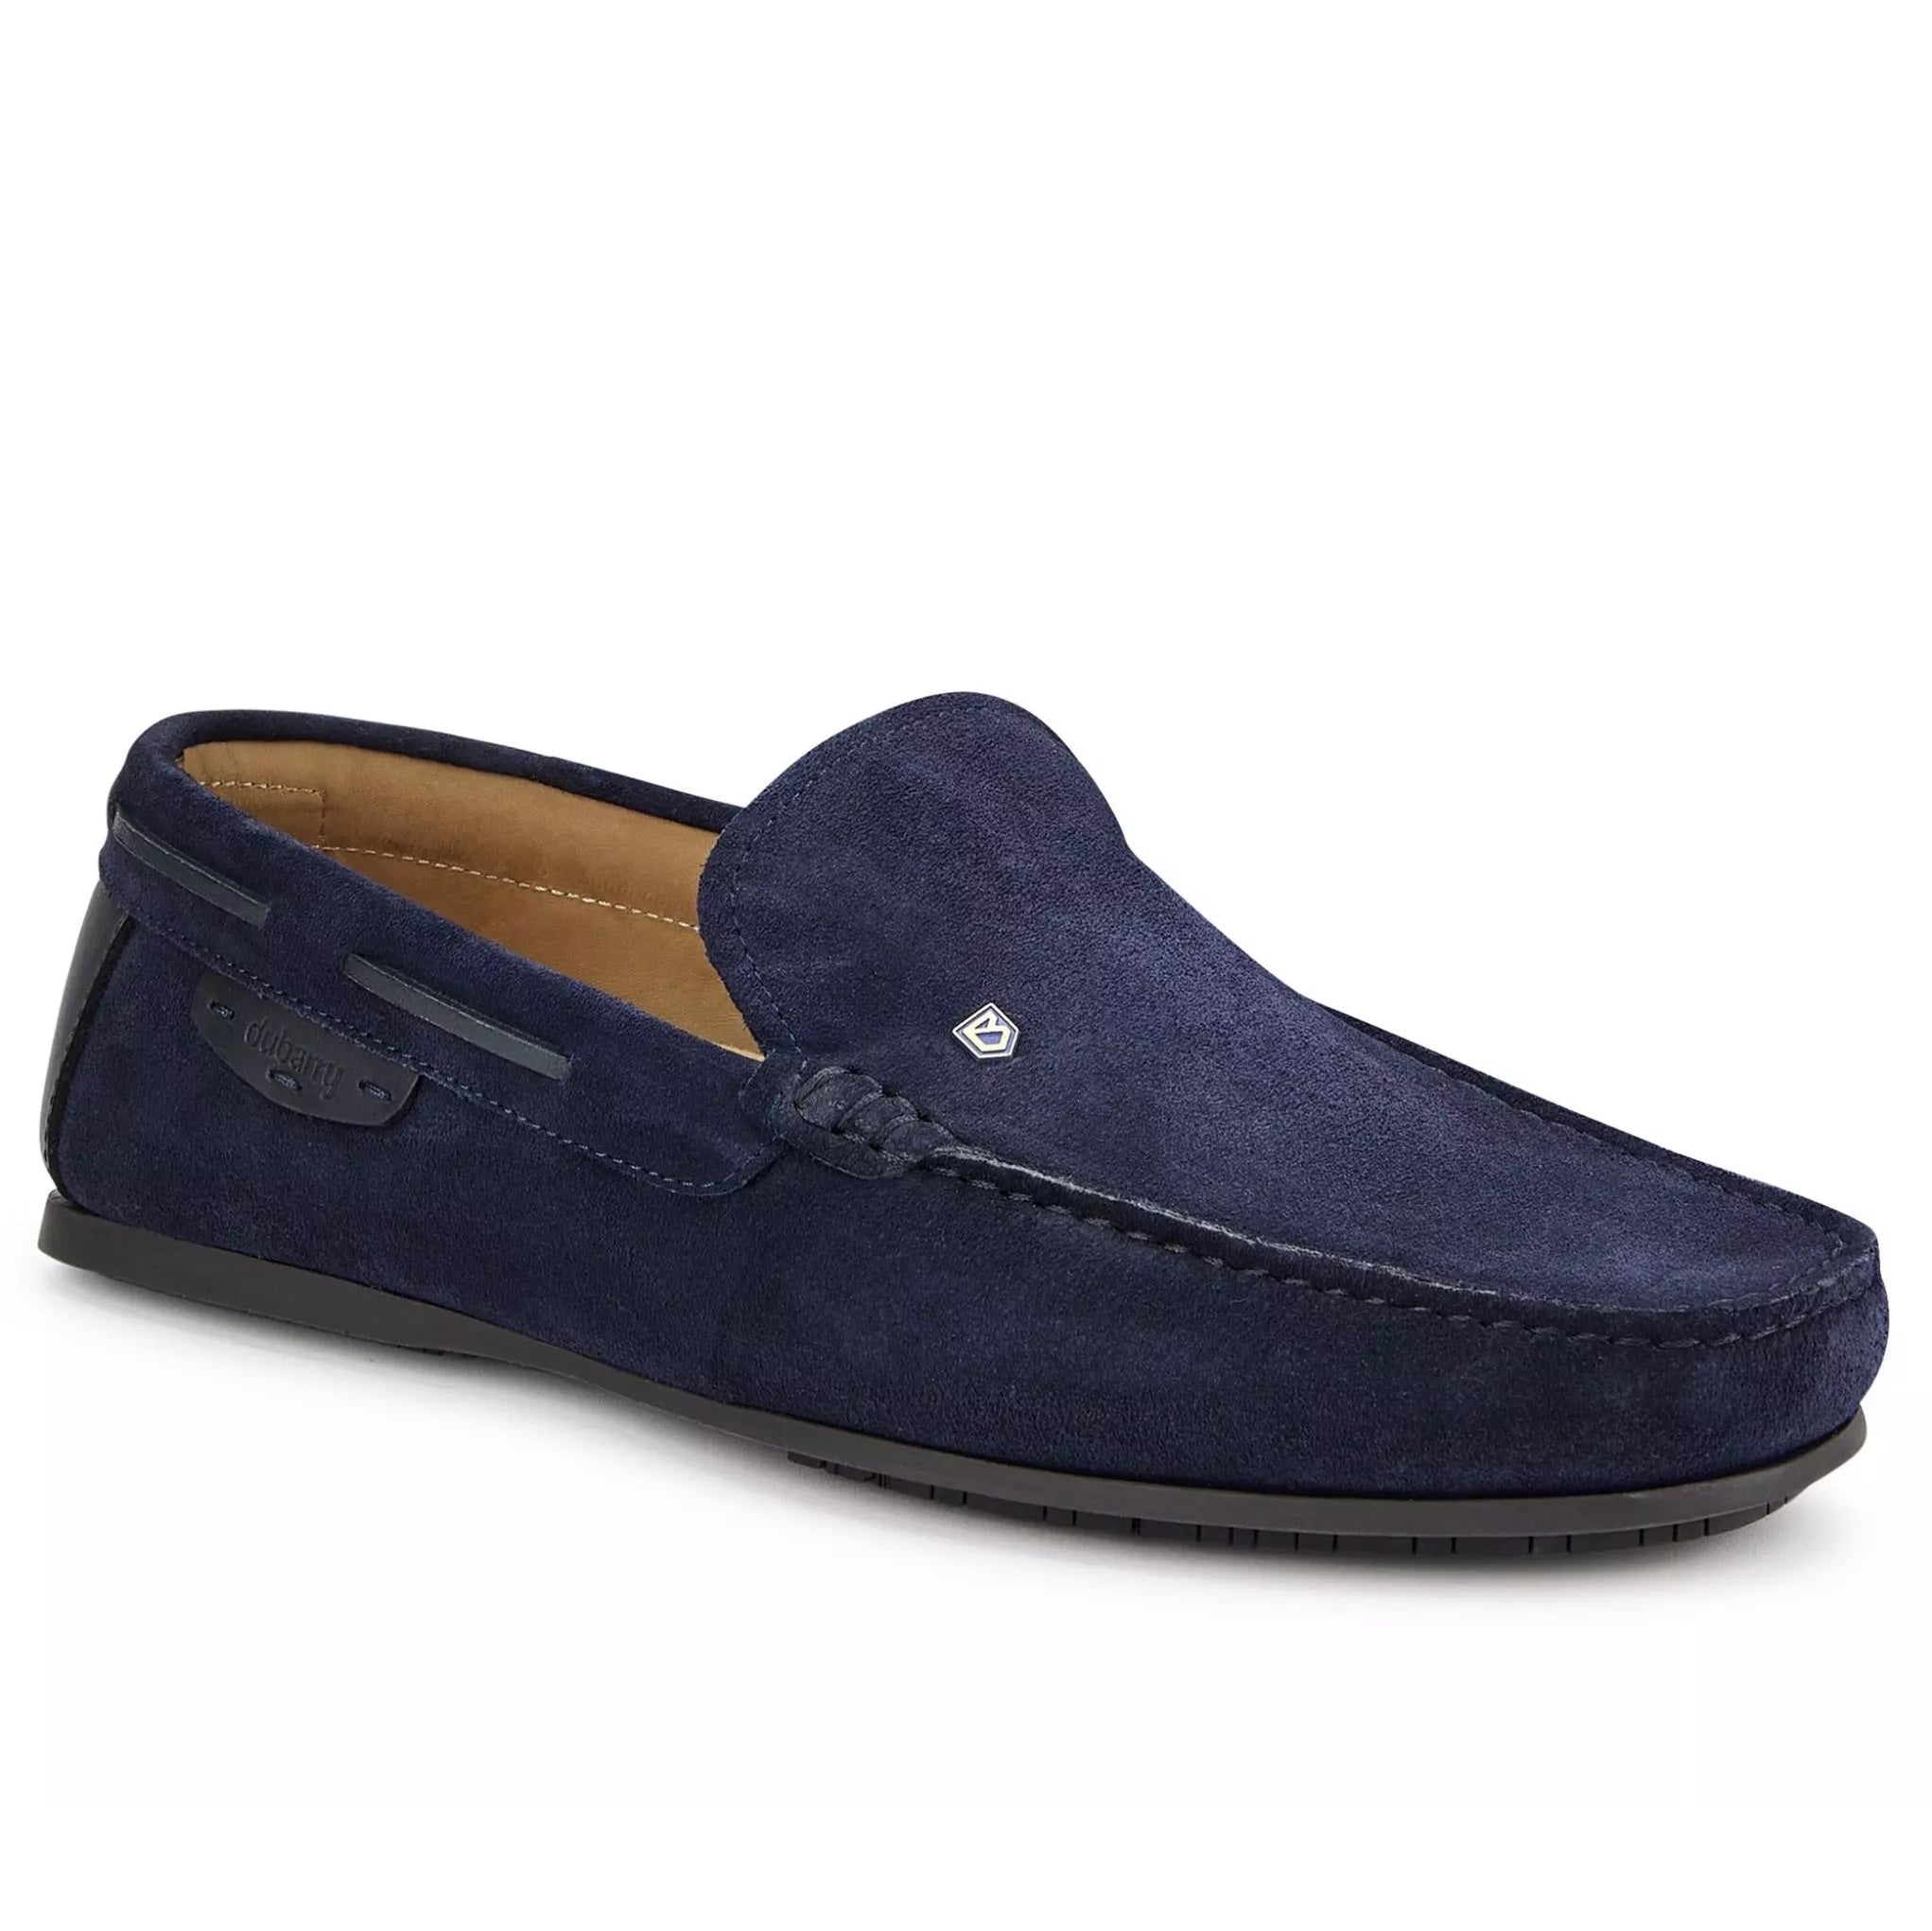 DUBARRY Fiji Suede Loafers - Men's - French Navy